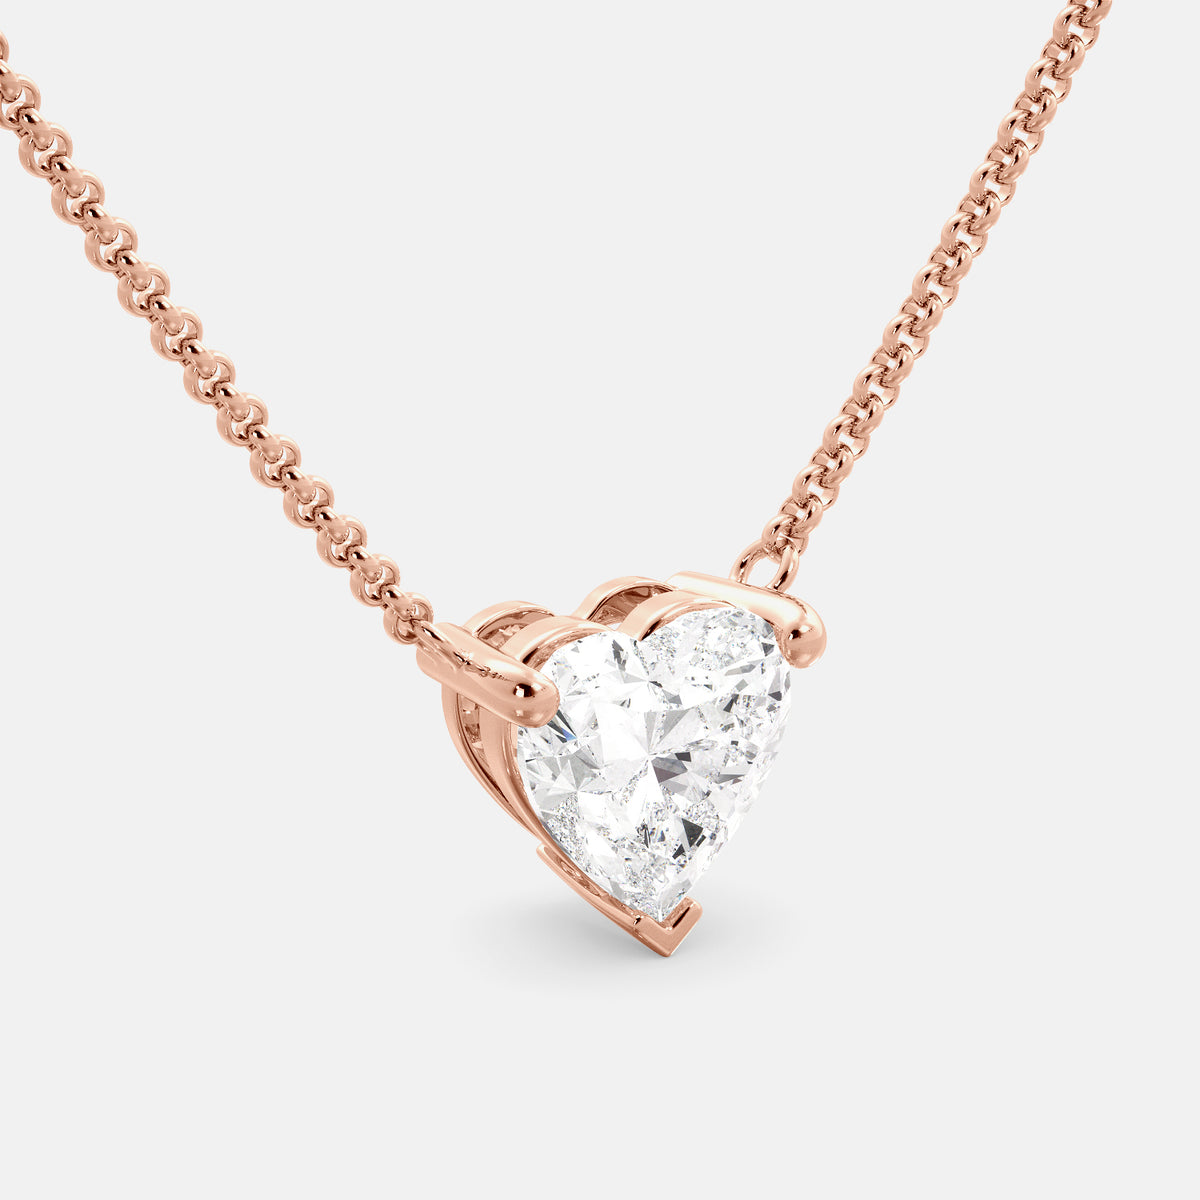 A close-up of a heart-shaped diamond necklace in recycled rose gold. The necklace is set with a single heart-shaped diamond in the center of a pendant. The necklace is made of recycled rose gold and has a simple, elegant design. The diamond is sparkling and reflects light beautifully. The necklace is a perfect gift for a loved one or a special occasion.